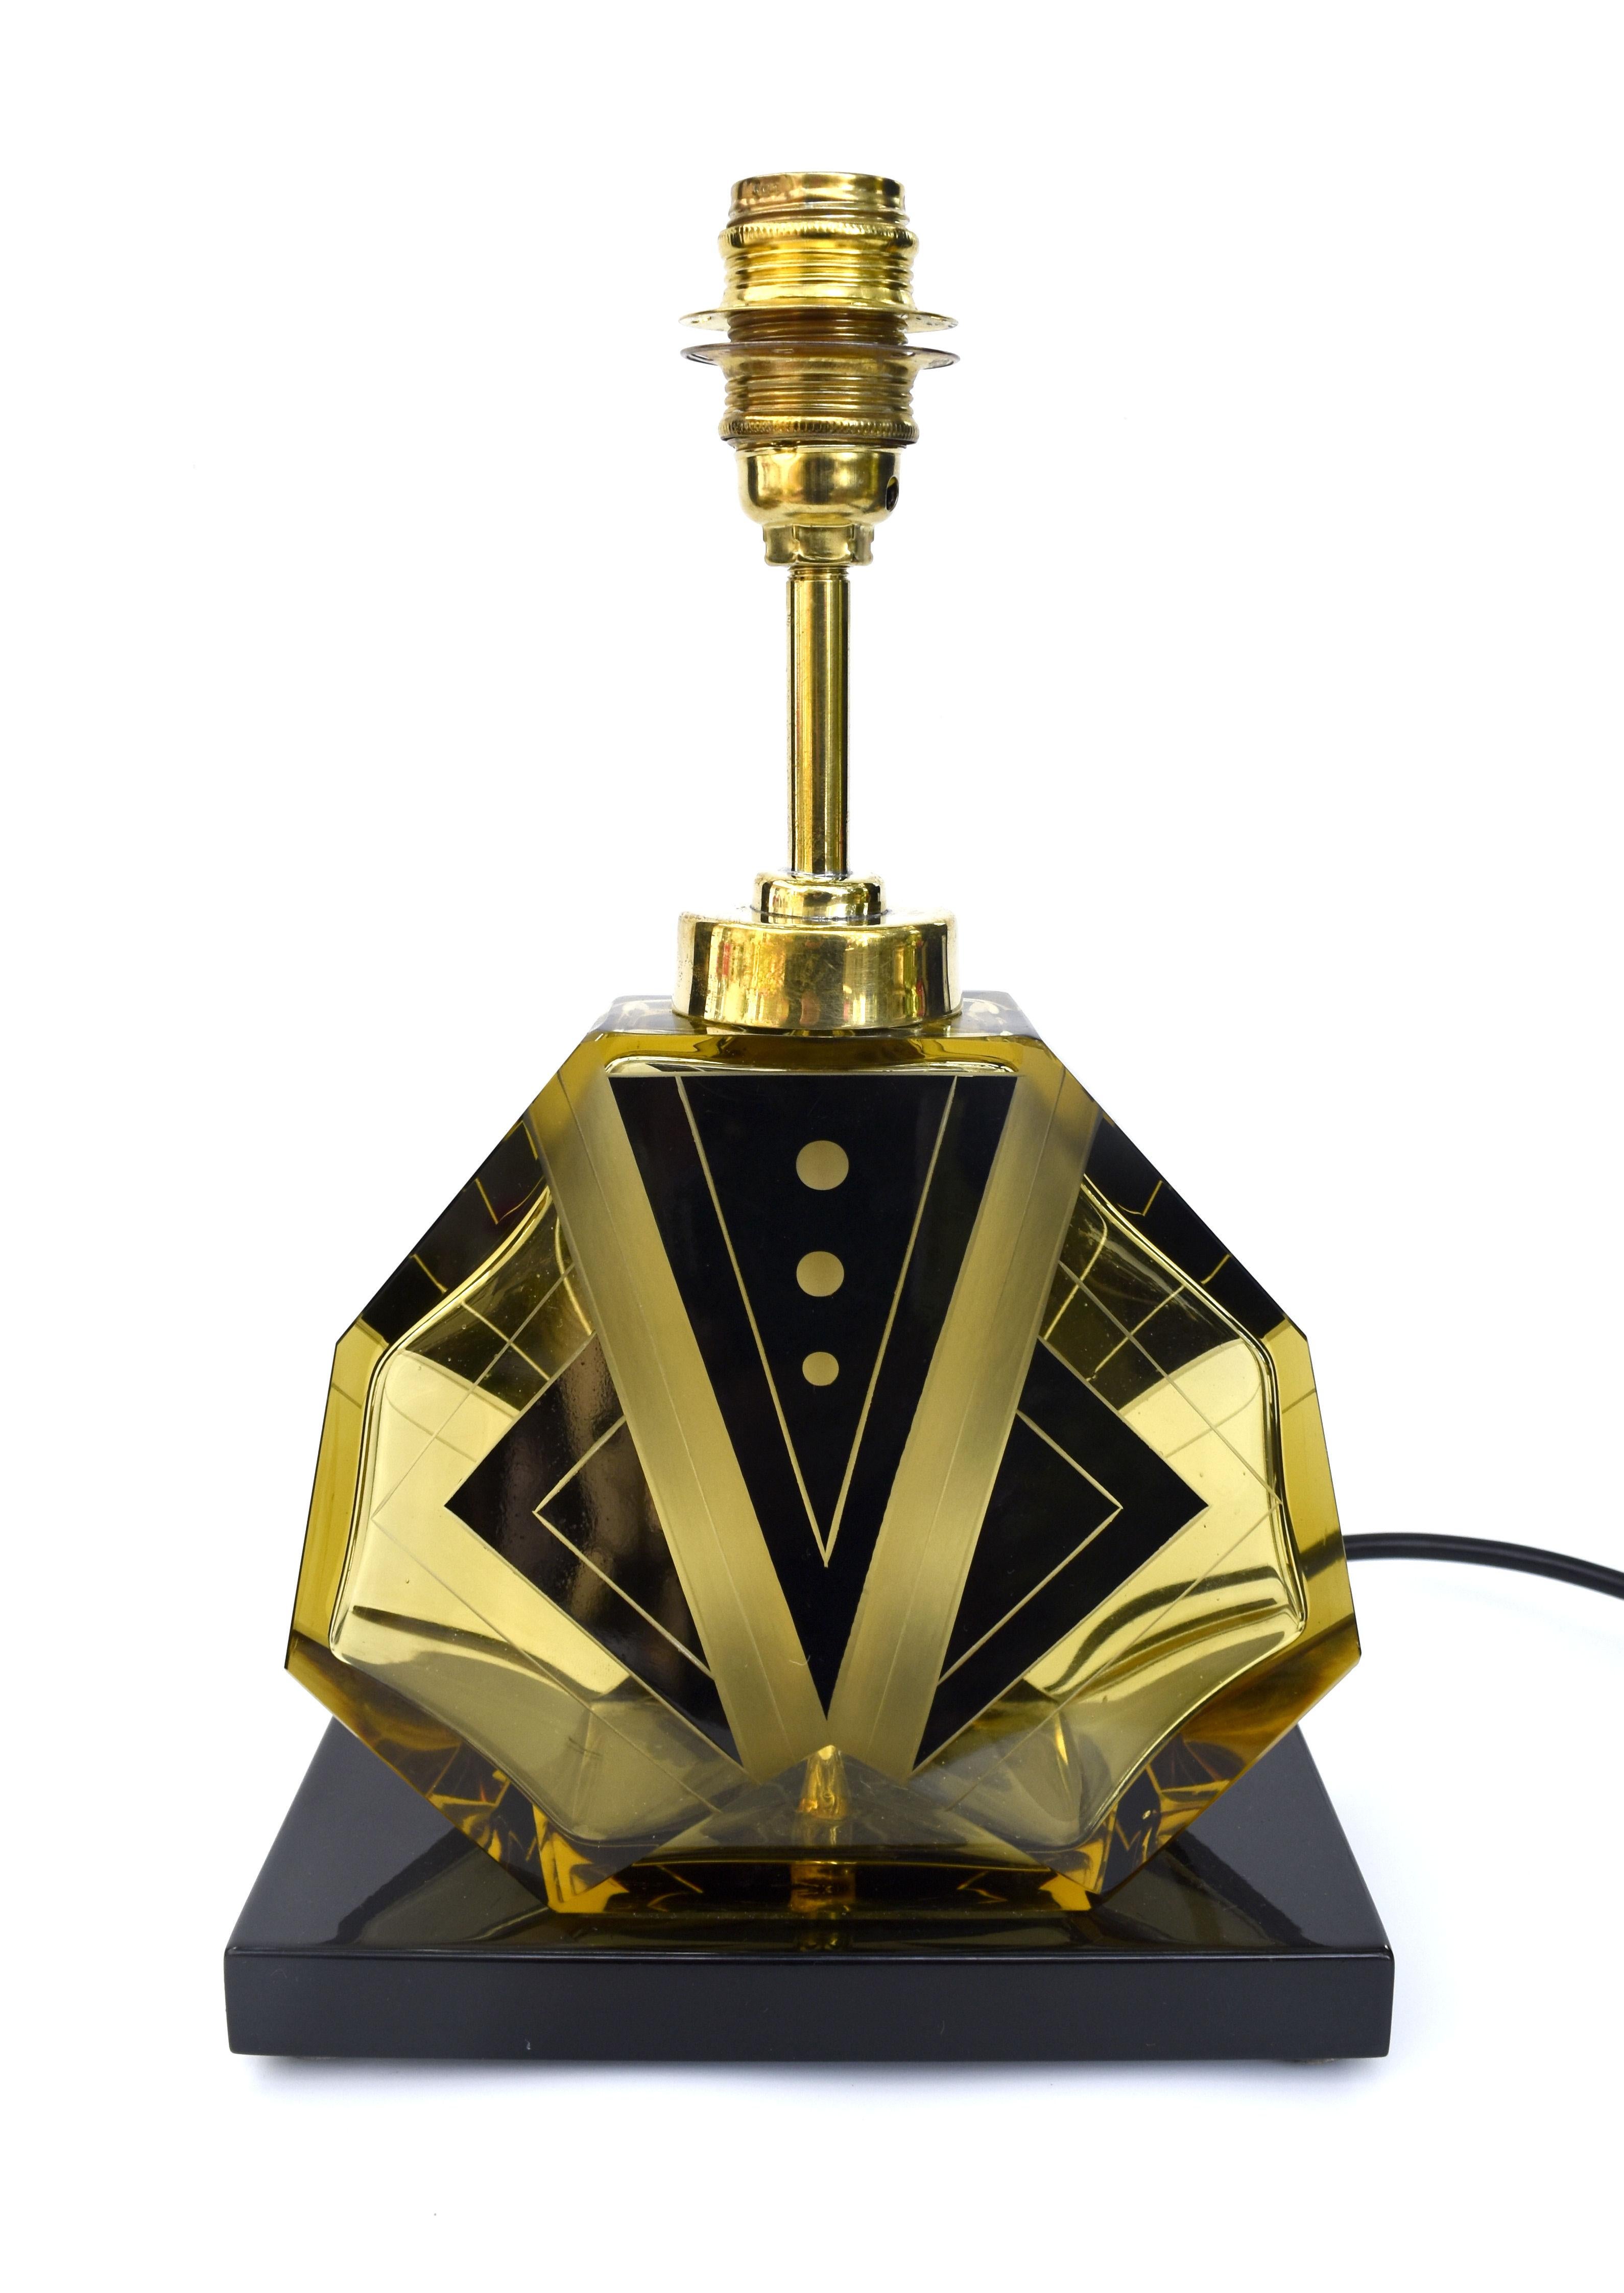 For your consideration is this fabulously iconic looking Art Deco table lamp by Karl Palda. The body of the lamp is actually a decanter that had a damaged neck and has been cleverly converted to a table lamp. We've added a shade which you can choose